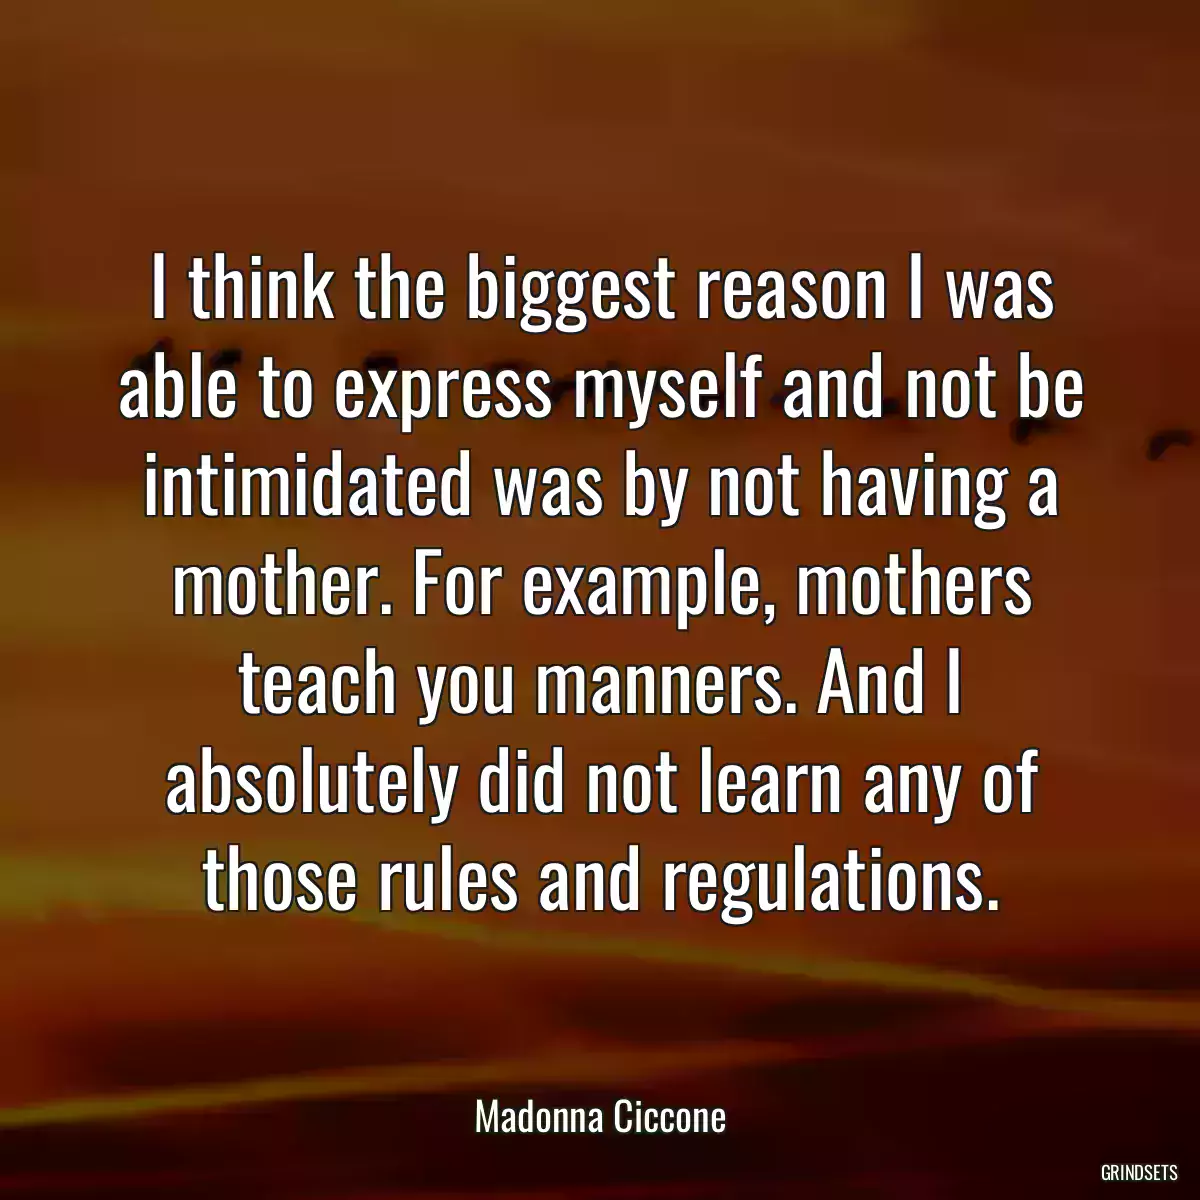 I think the biggest reason I was able to express myself and not be intimidated was by not having a mother. For example, mothers teach you manners. And I absolutely did not learn any of those rules and regulations.